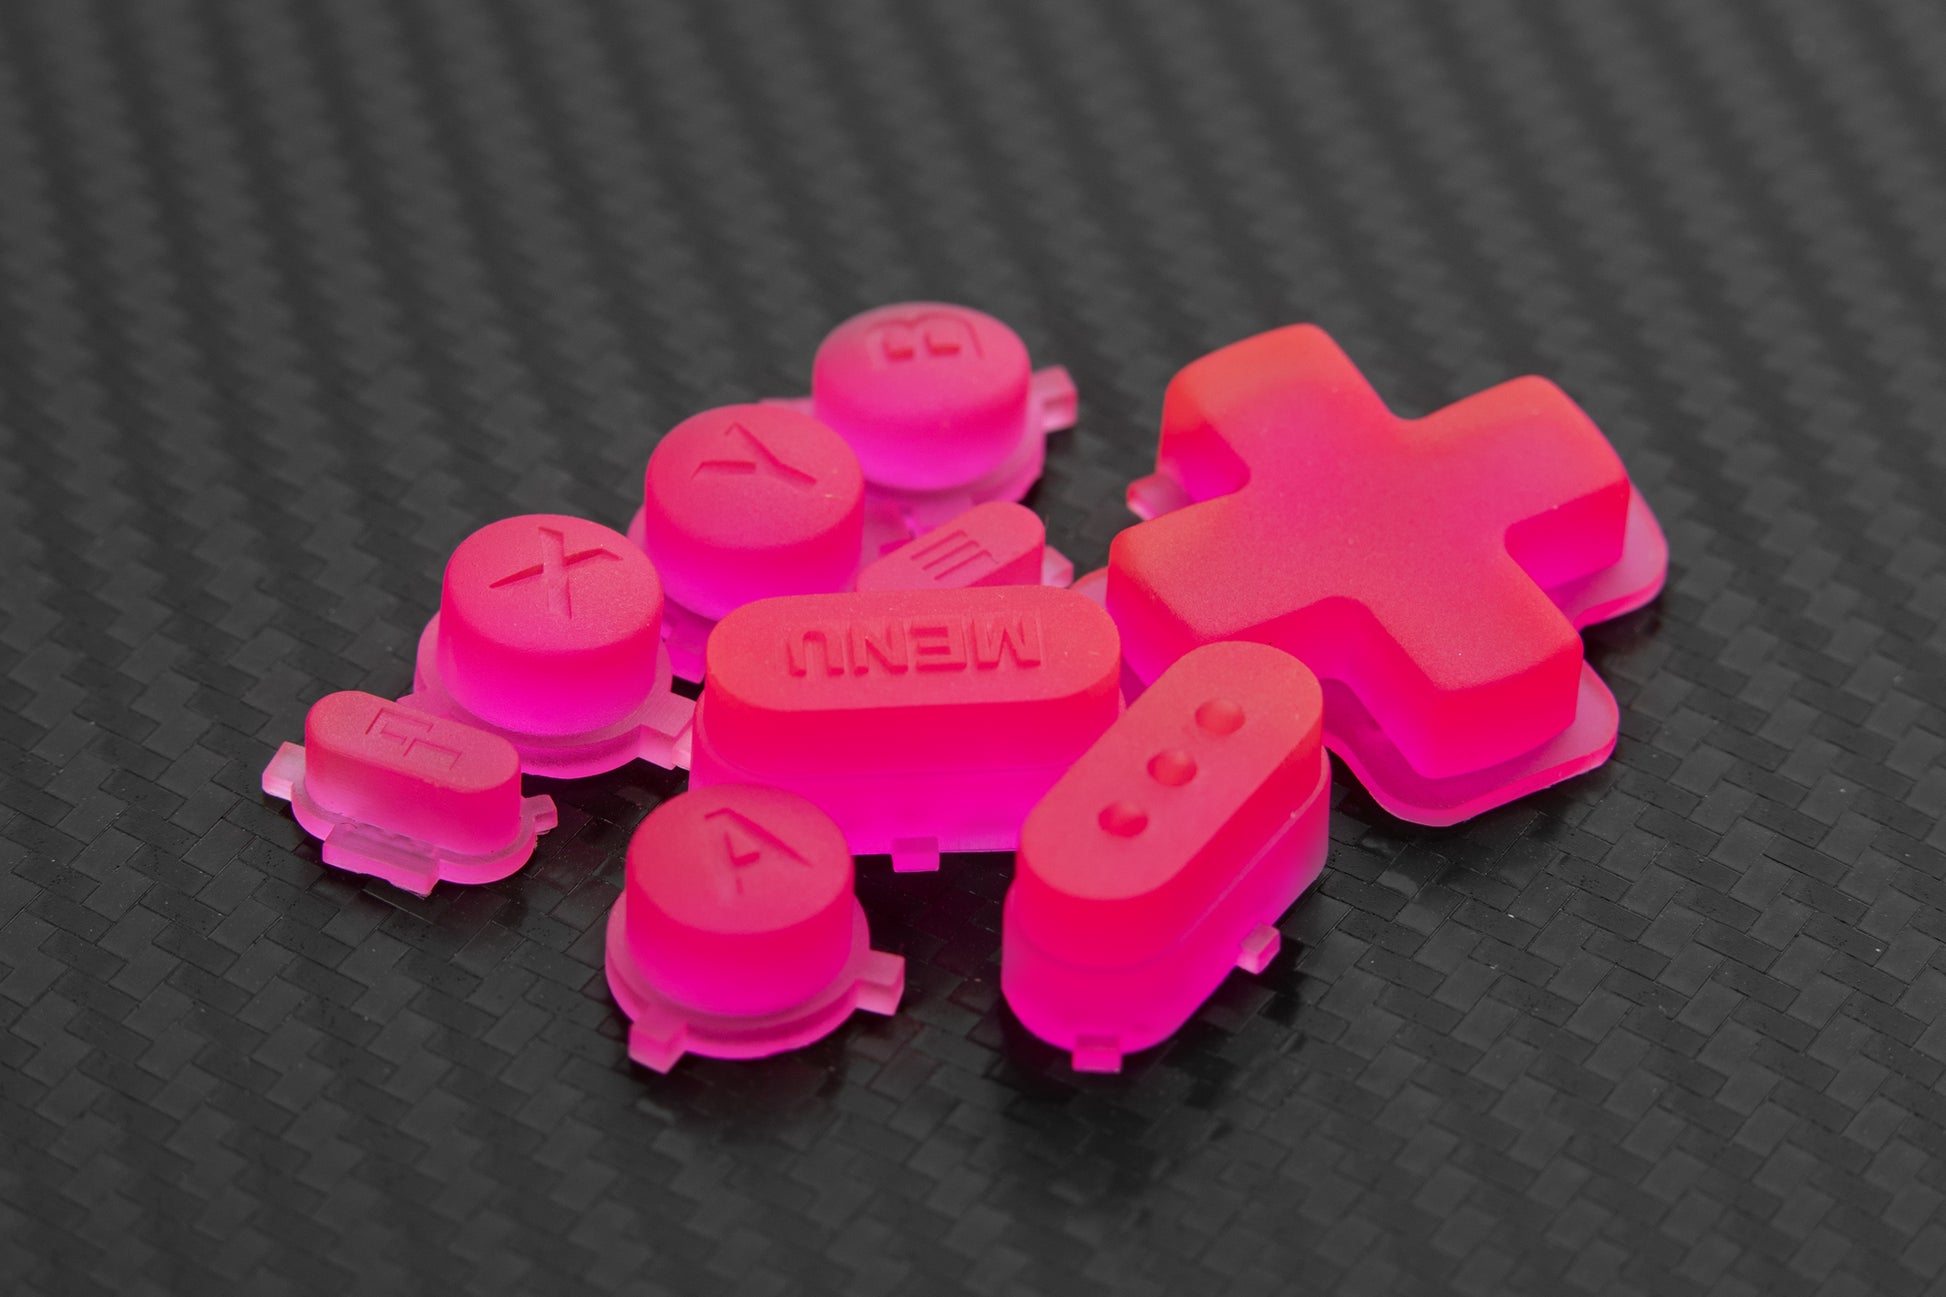 Steam deck buttons bright transparent neon pink in a pile on carbon fiber background